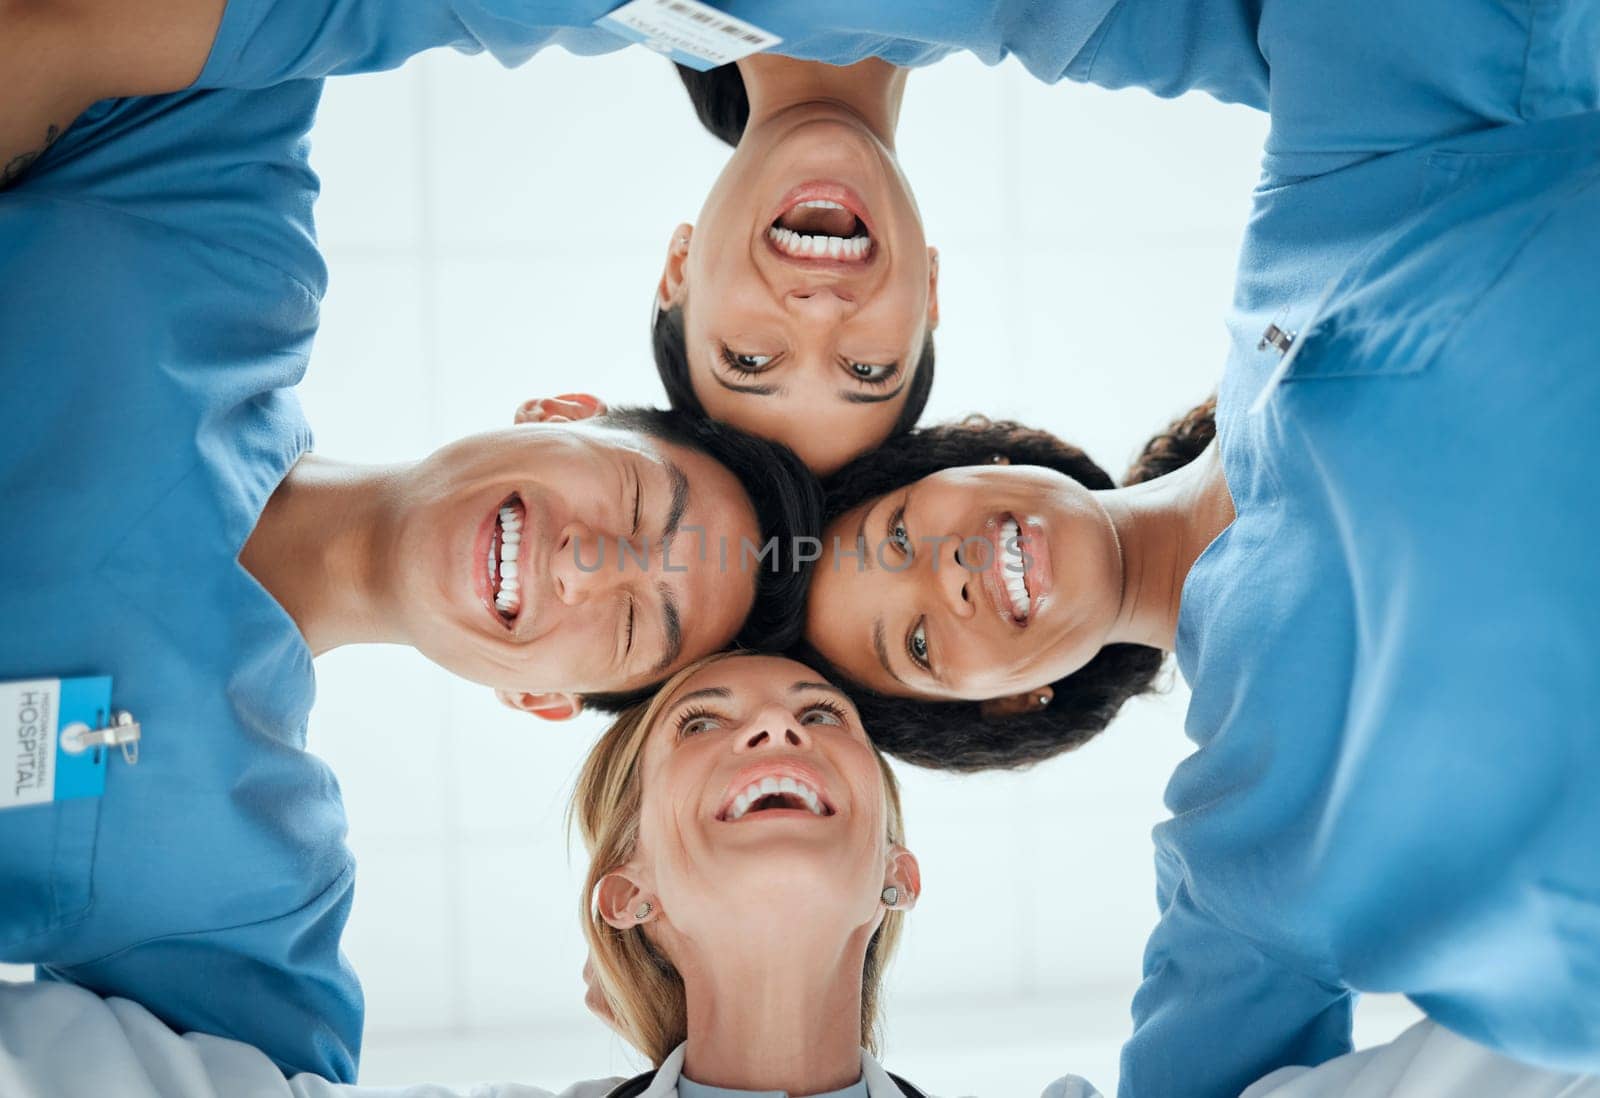 Smile, teamwork or faces of doctors in huddle laughing in collaboration together for healthcare goals. Low angle, funny team building or happy medical nurses with group support, motivation or mission.